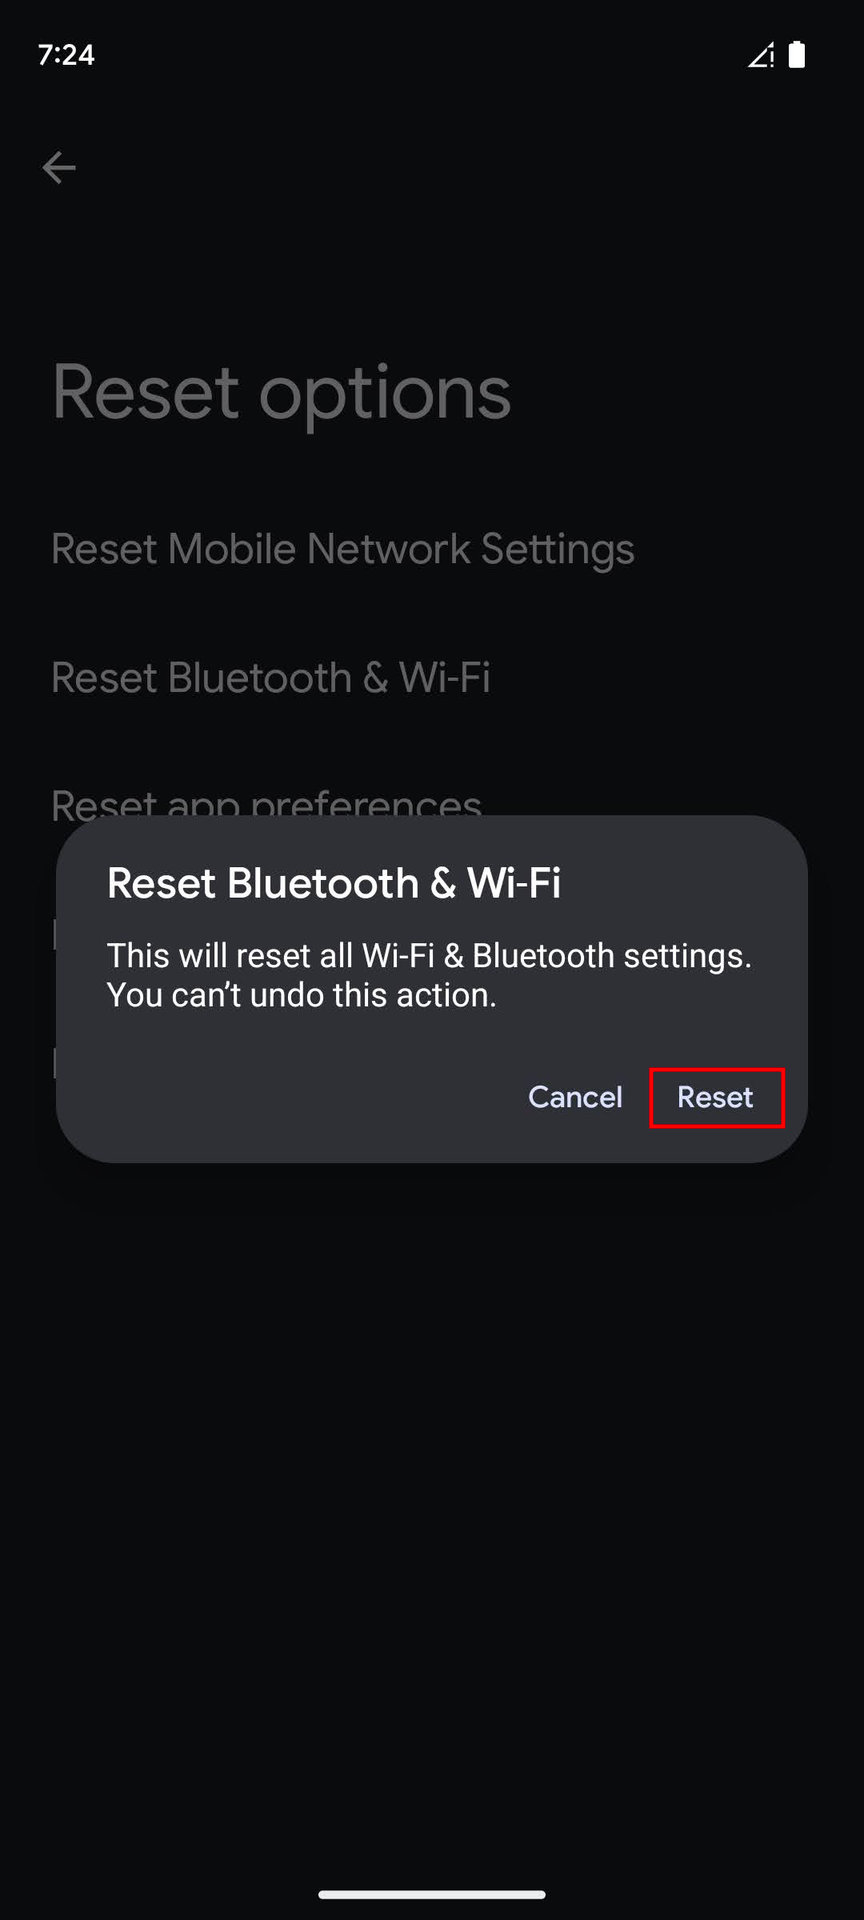 How to reset Bluetooth & Wi Fi settings on Android (4)